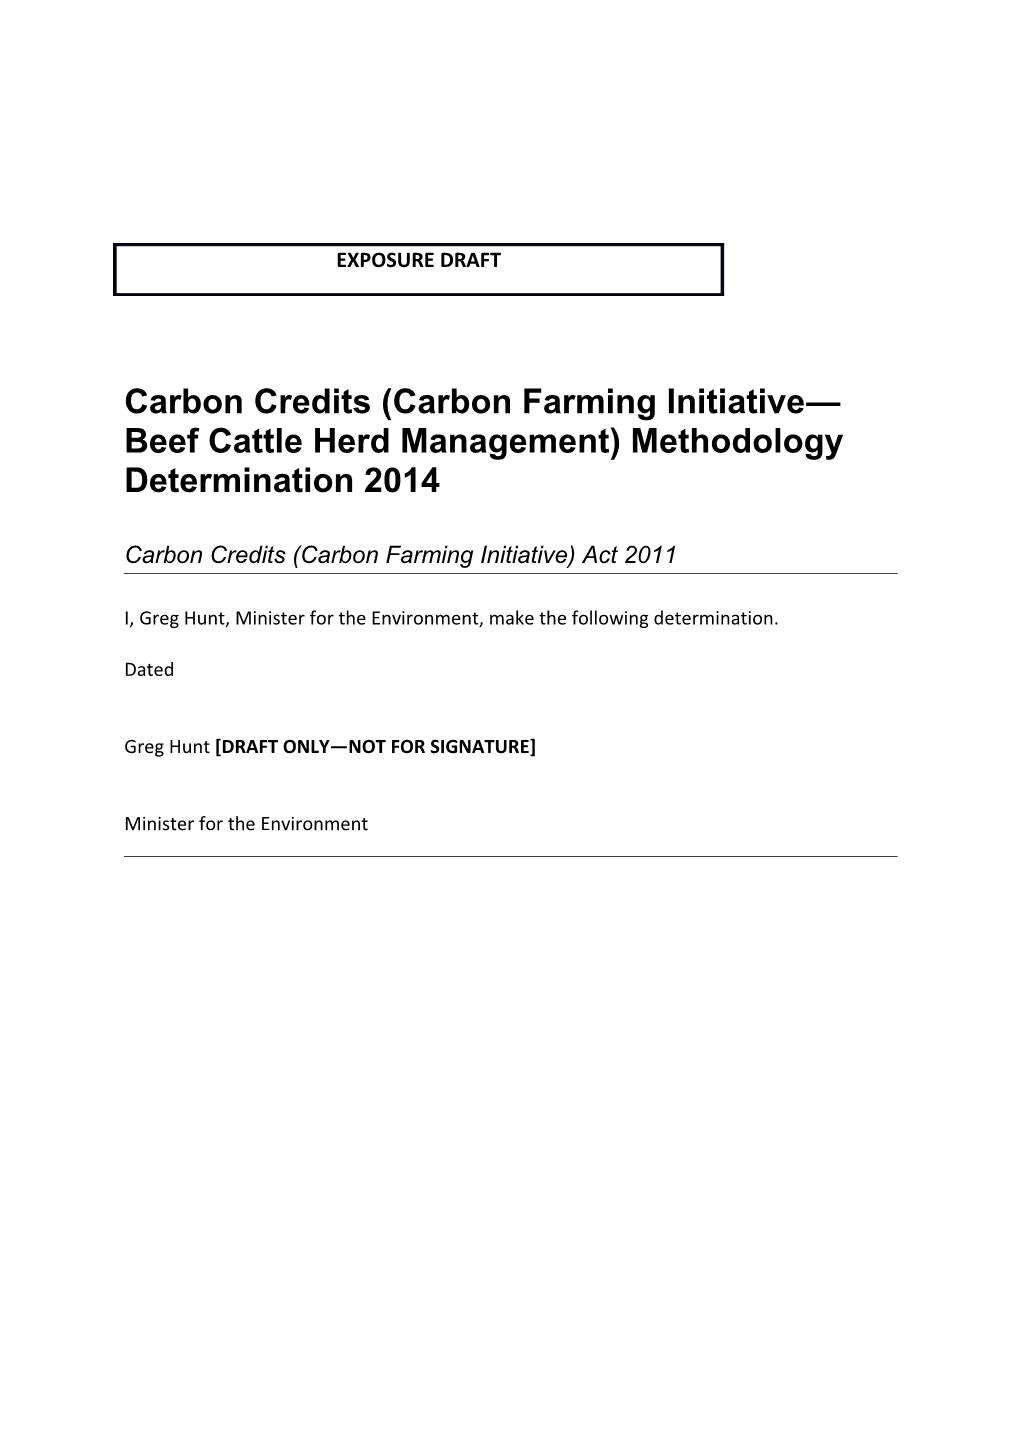 Carbon Credits (Carbon Farming Initiative Beef Cattle Herd Management) Methodology Determination